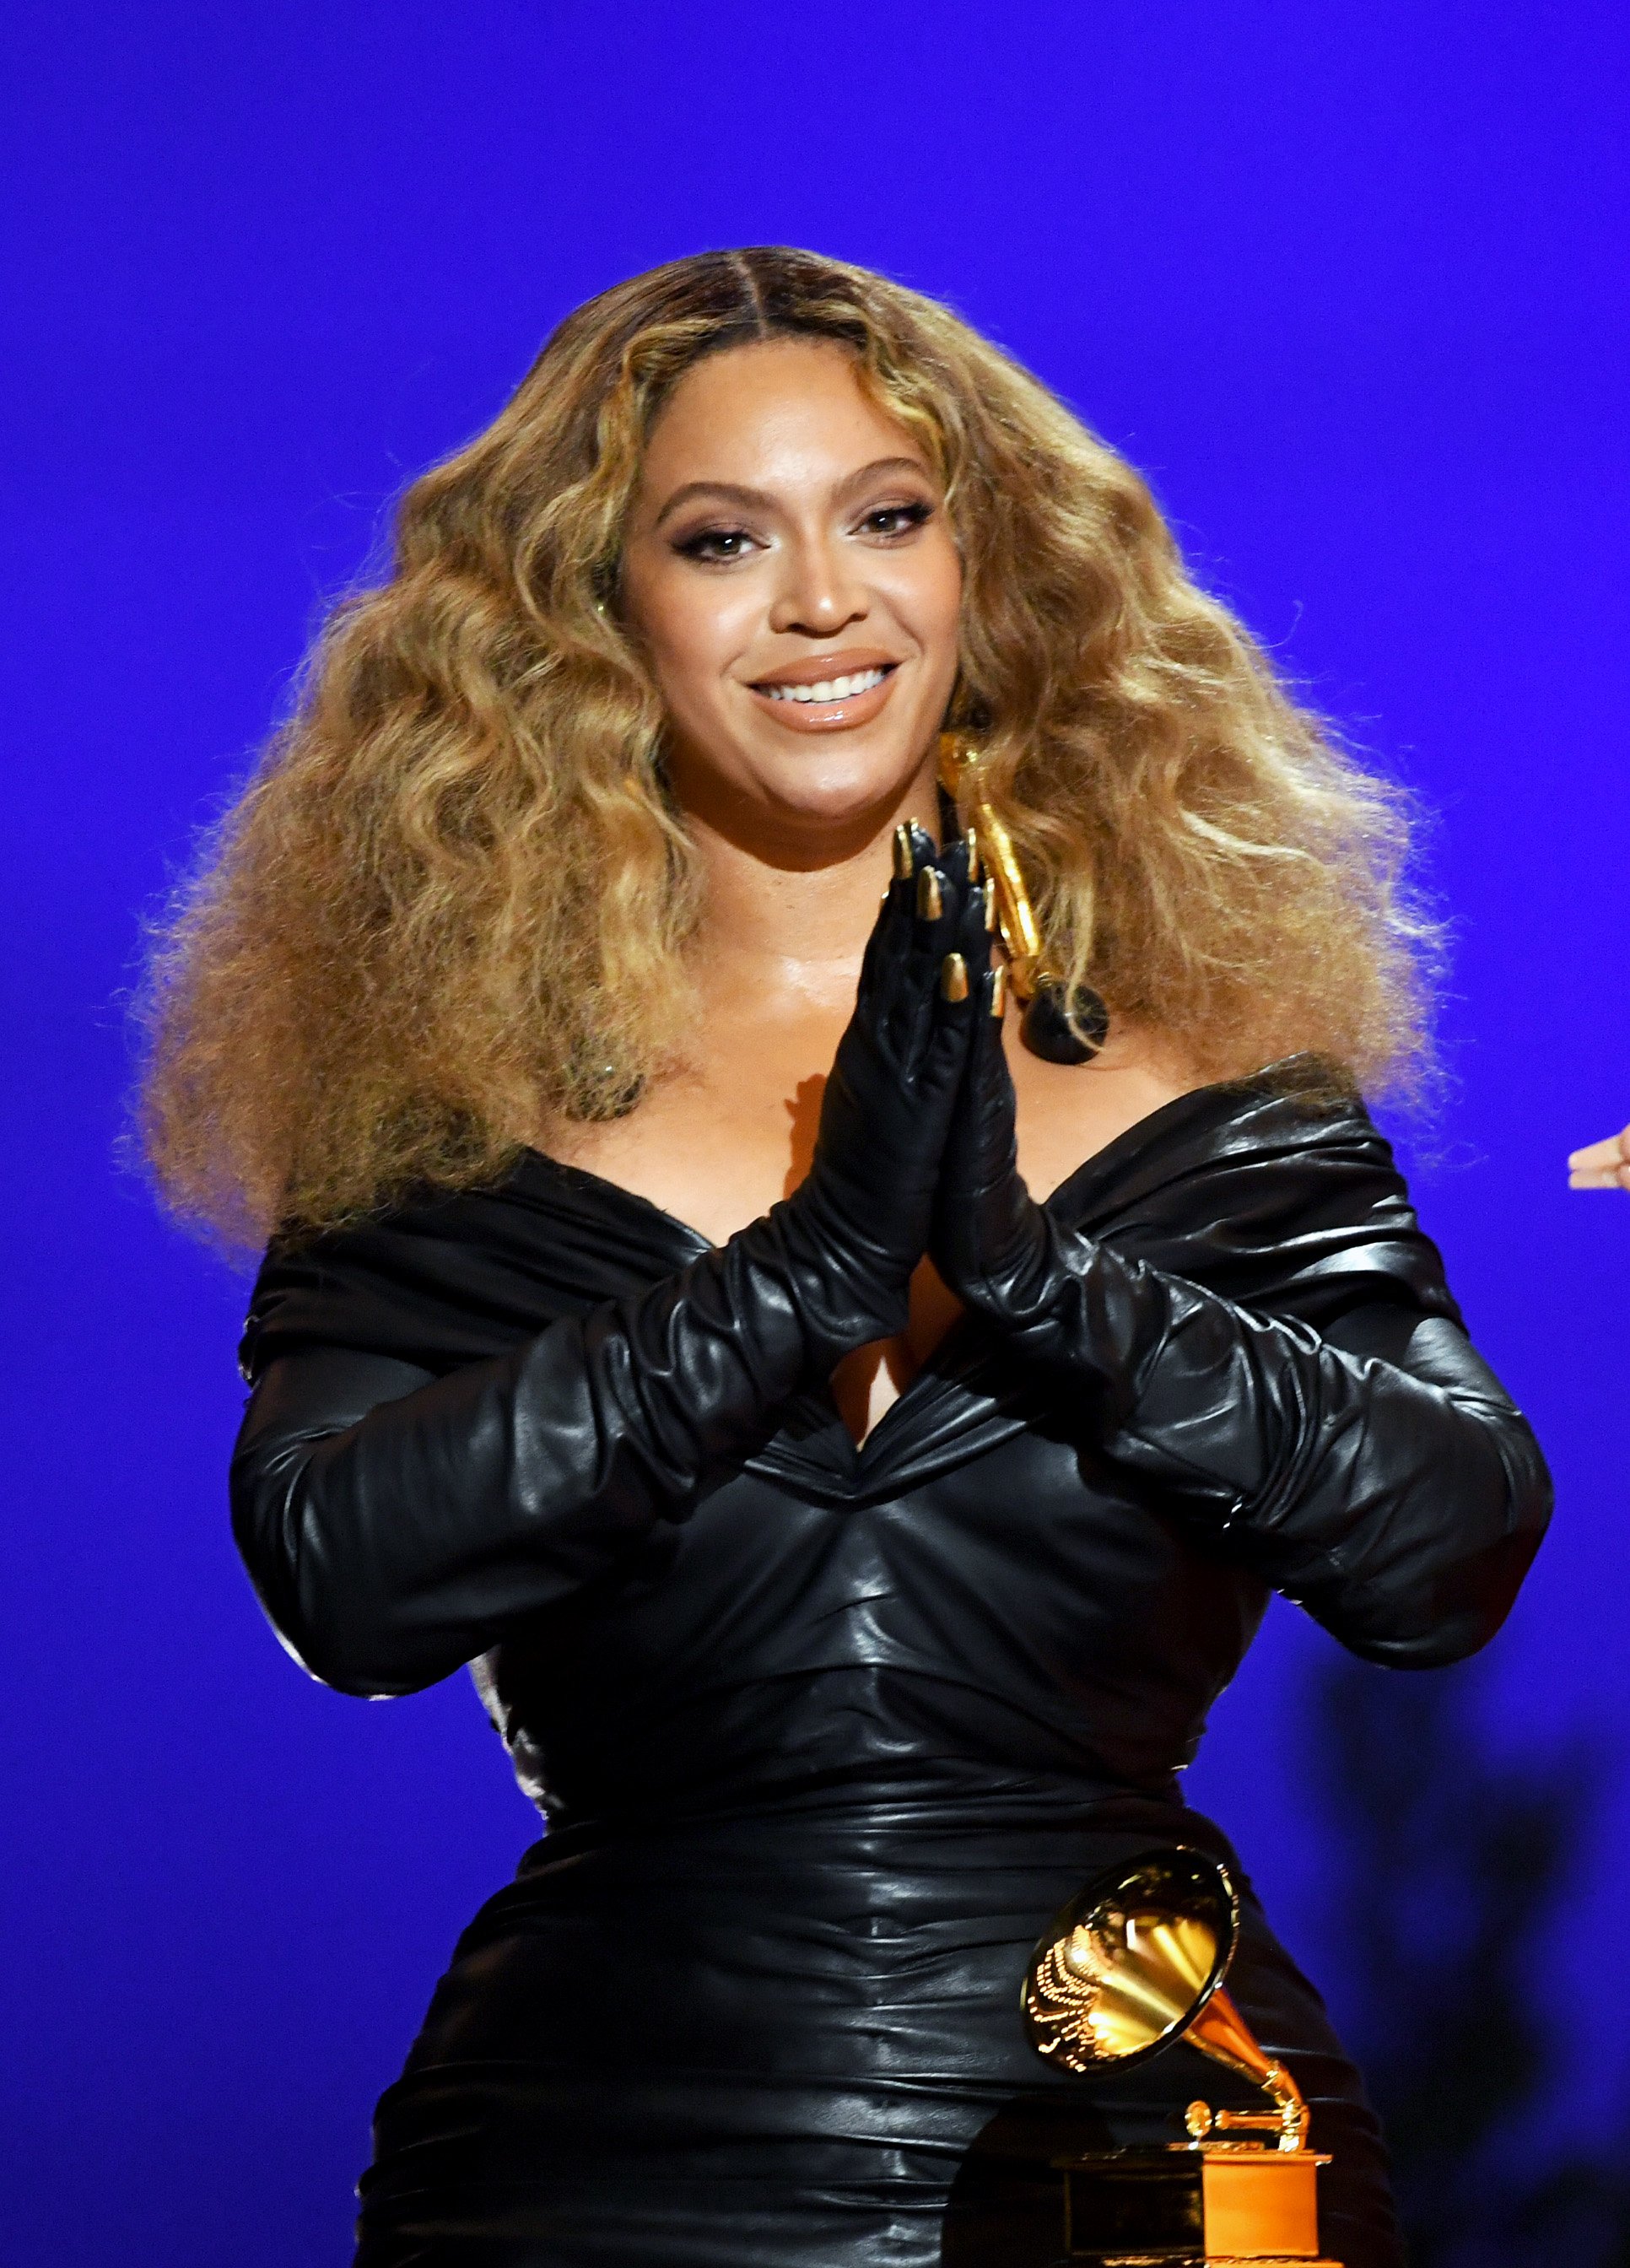 Beyoncé accepts an award at the 63rd Annual Grammy Awards on March 14, 2021 in Los Angeles, California. | Source: Getty Images